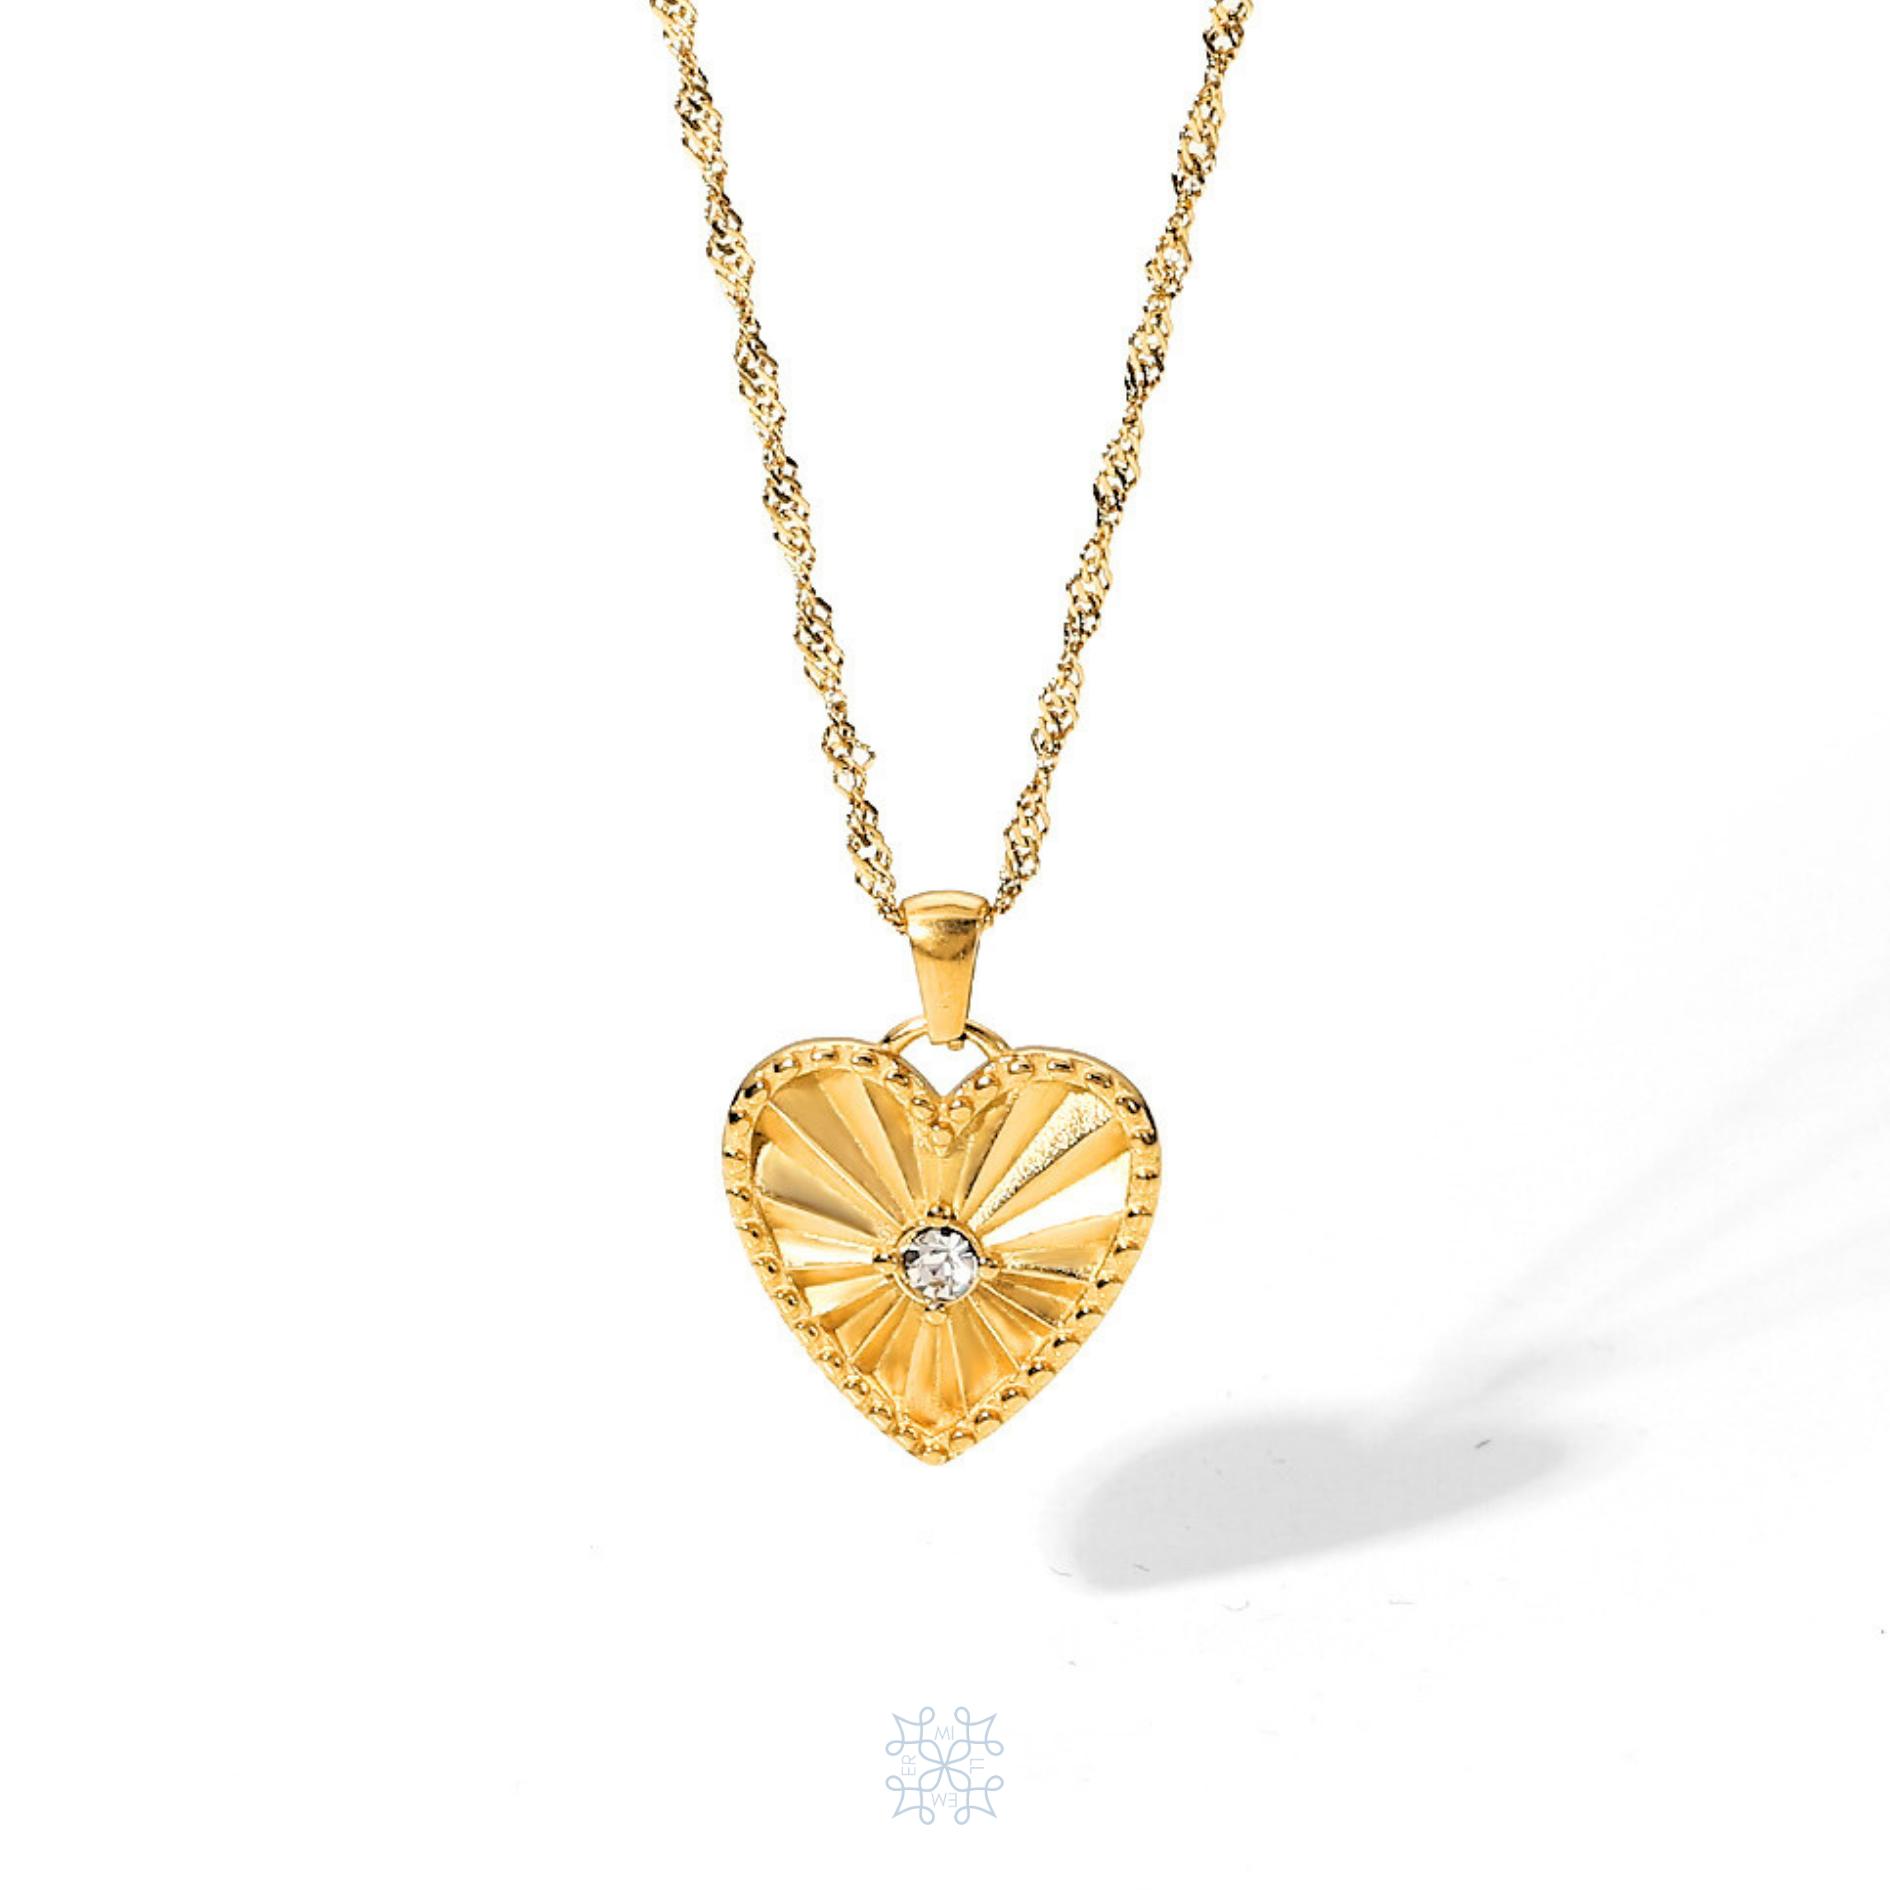 Gold plated waterproof chain necklace with a heart pendant droping on the chain. A zircon stone in the middle of the heart. The heart has engraved rays pattern starting from the middle opening the borders of the gold heart. Heart Pendant gold necklace.